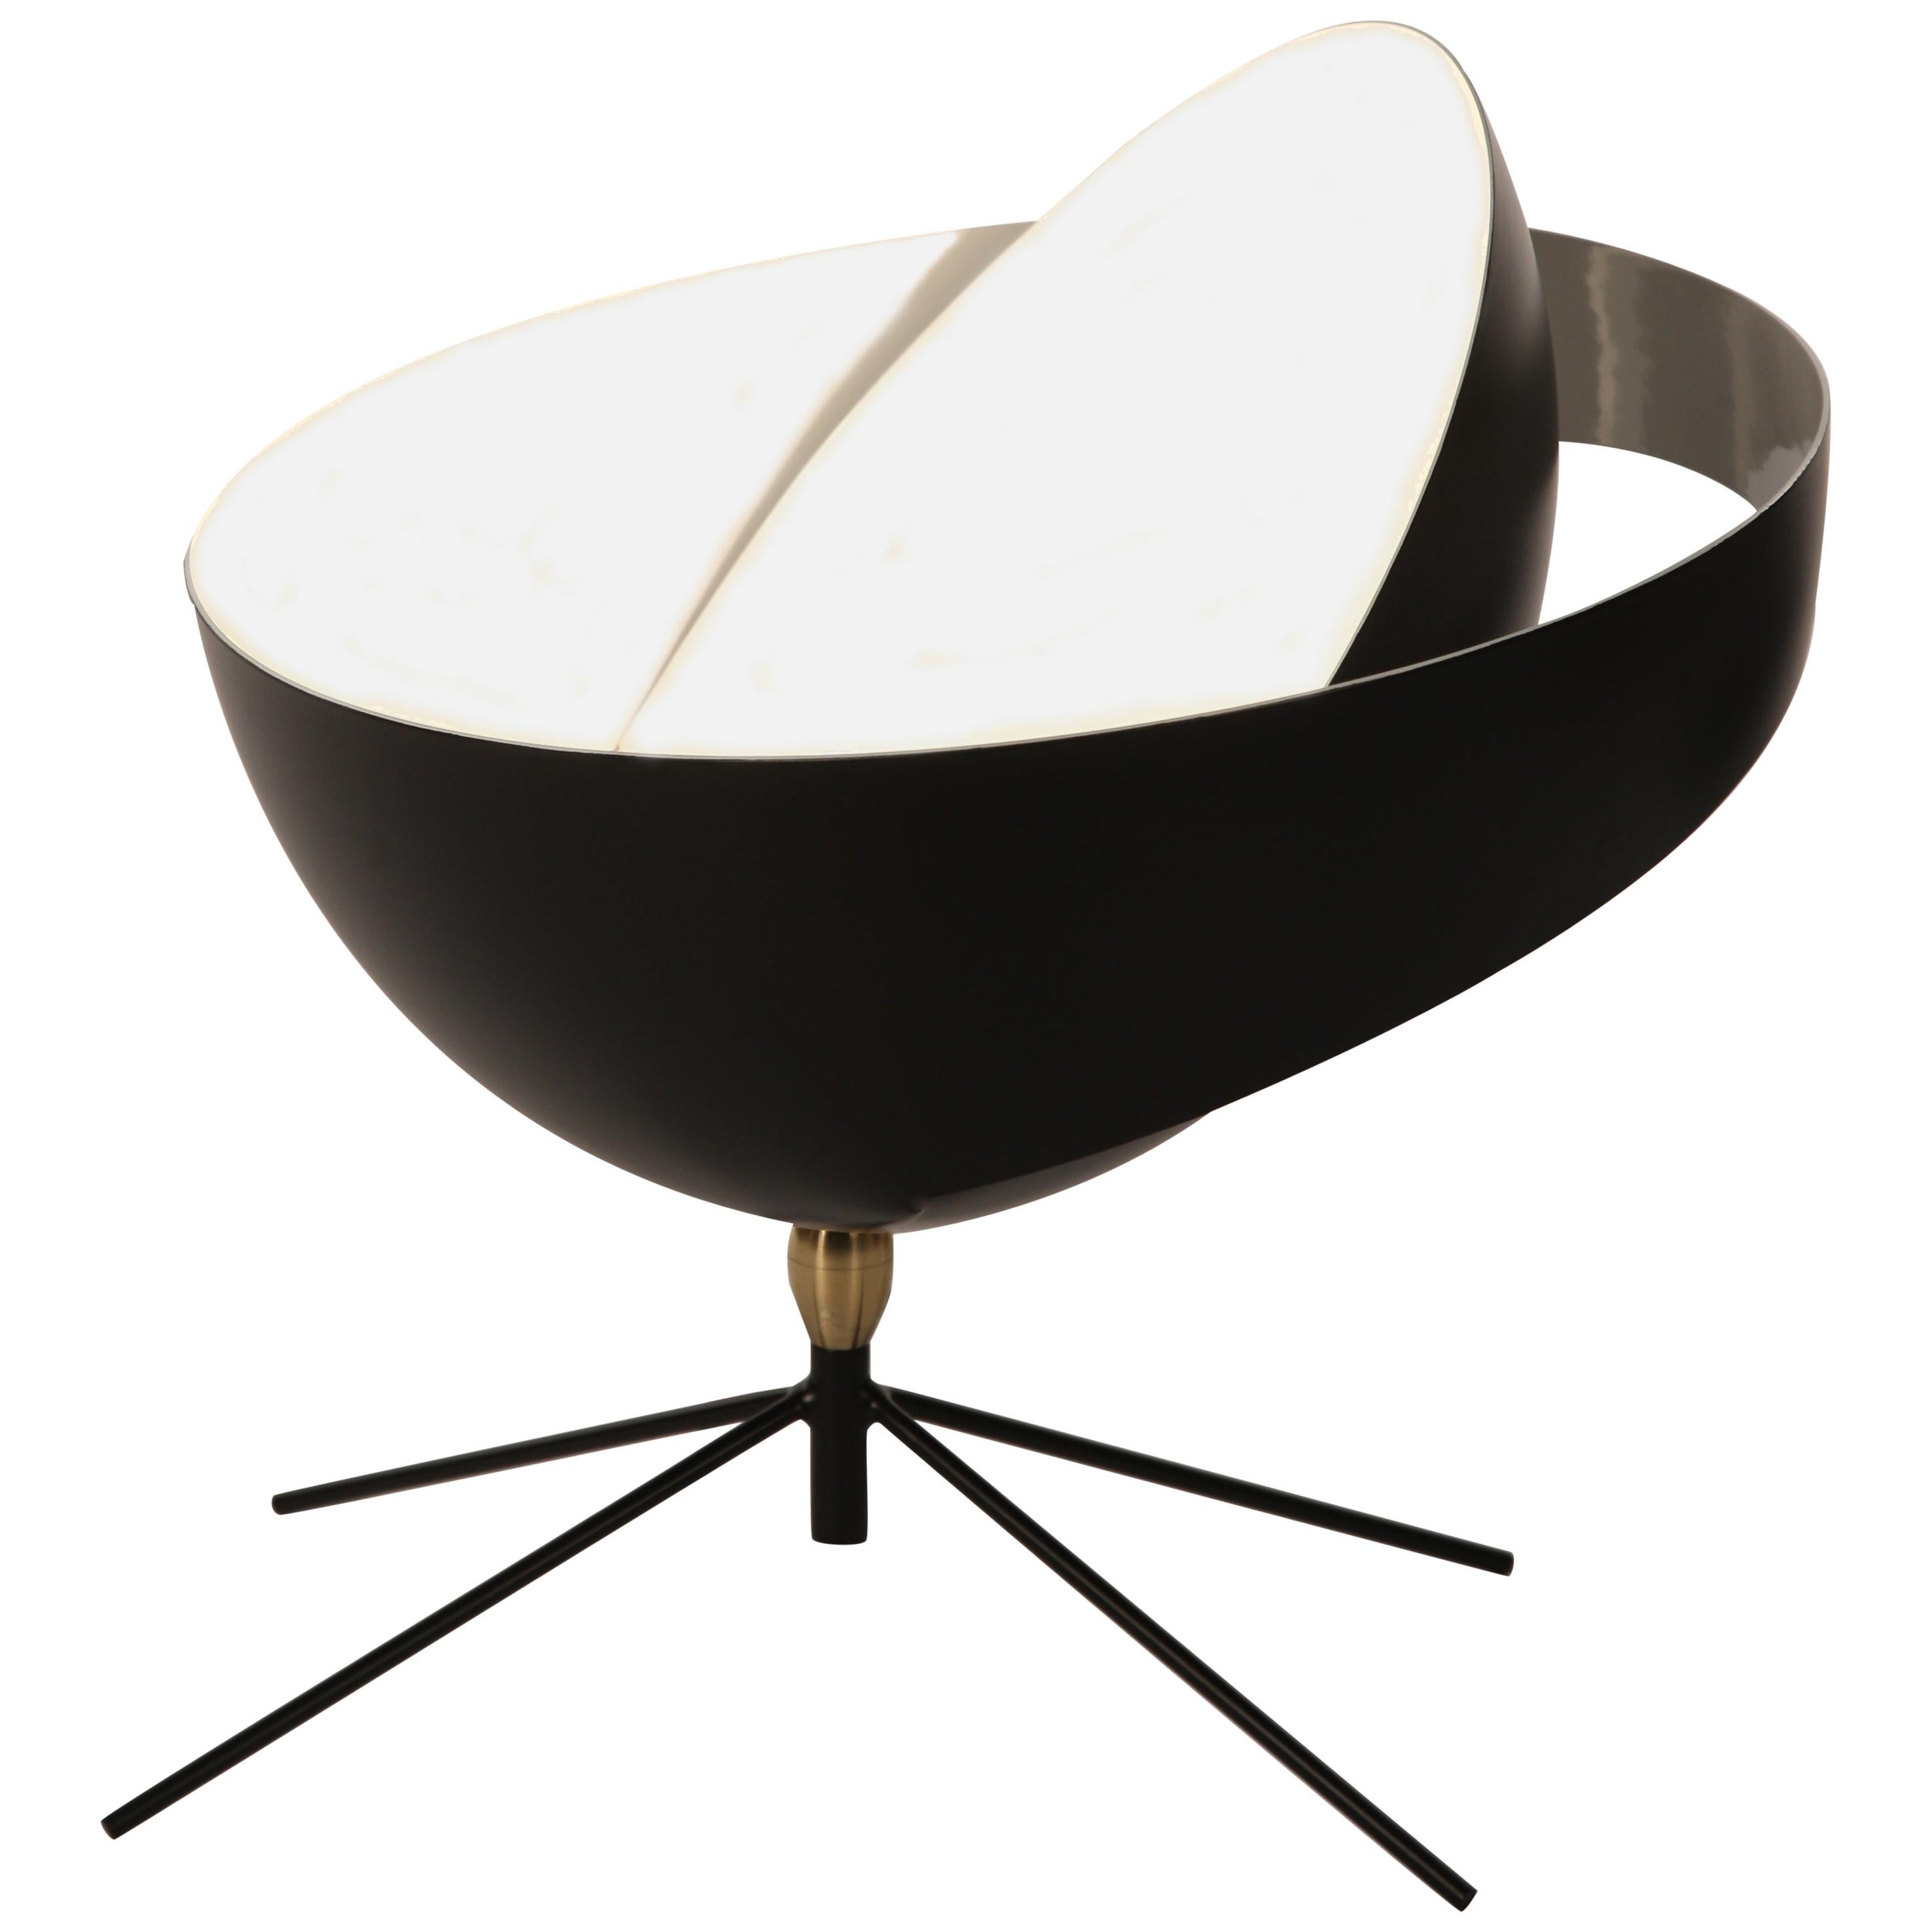 Serge Mouille "Saturn" Table Lamp in Black For Sale